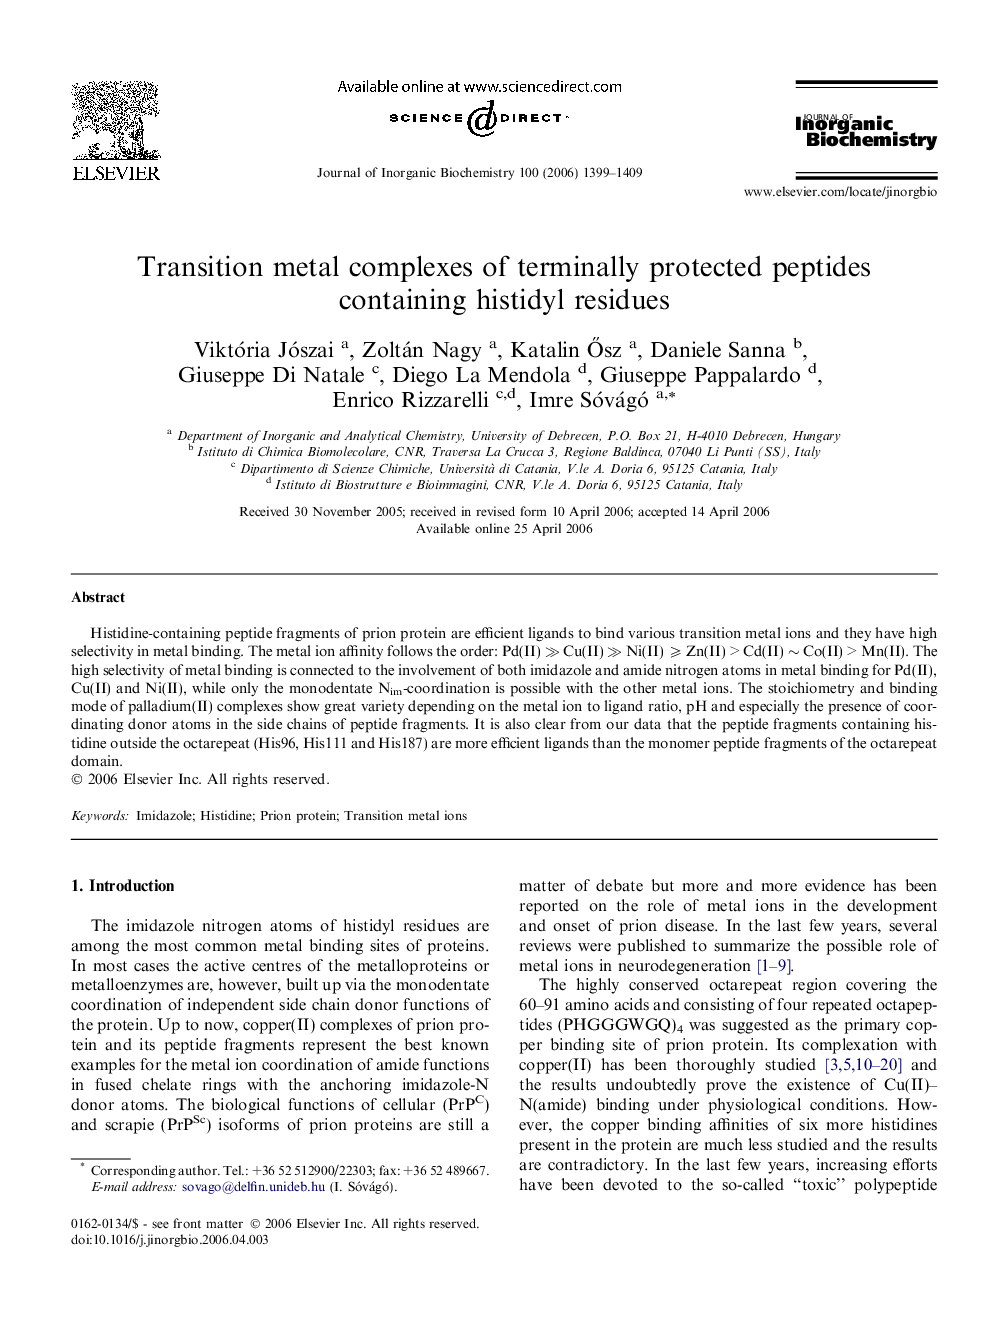 Transition metal complexes of terminally protected peptides containing histidyl residues